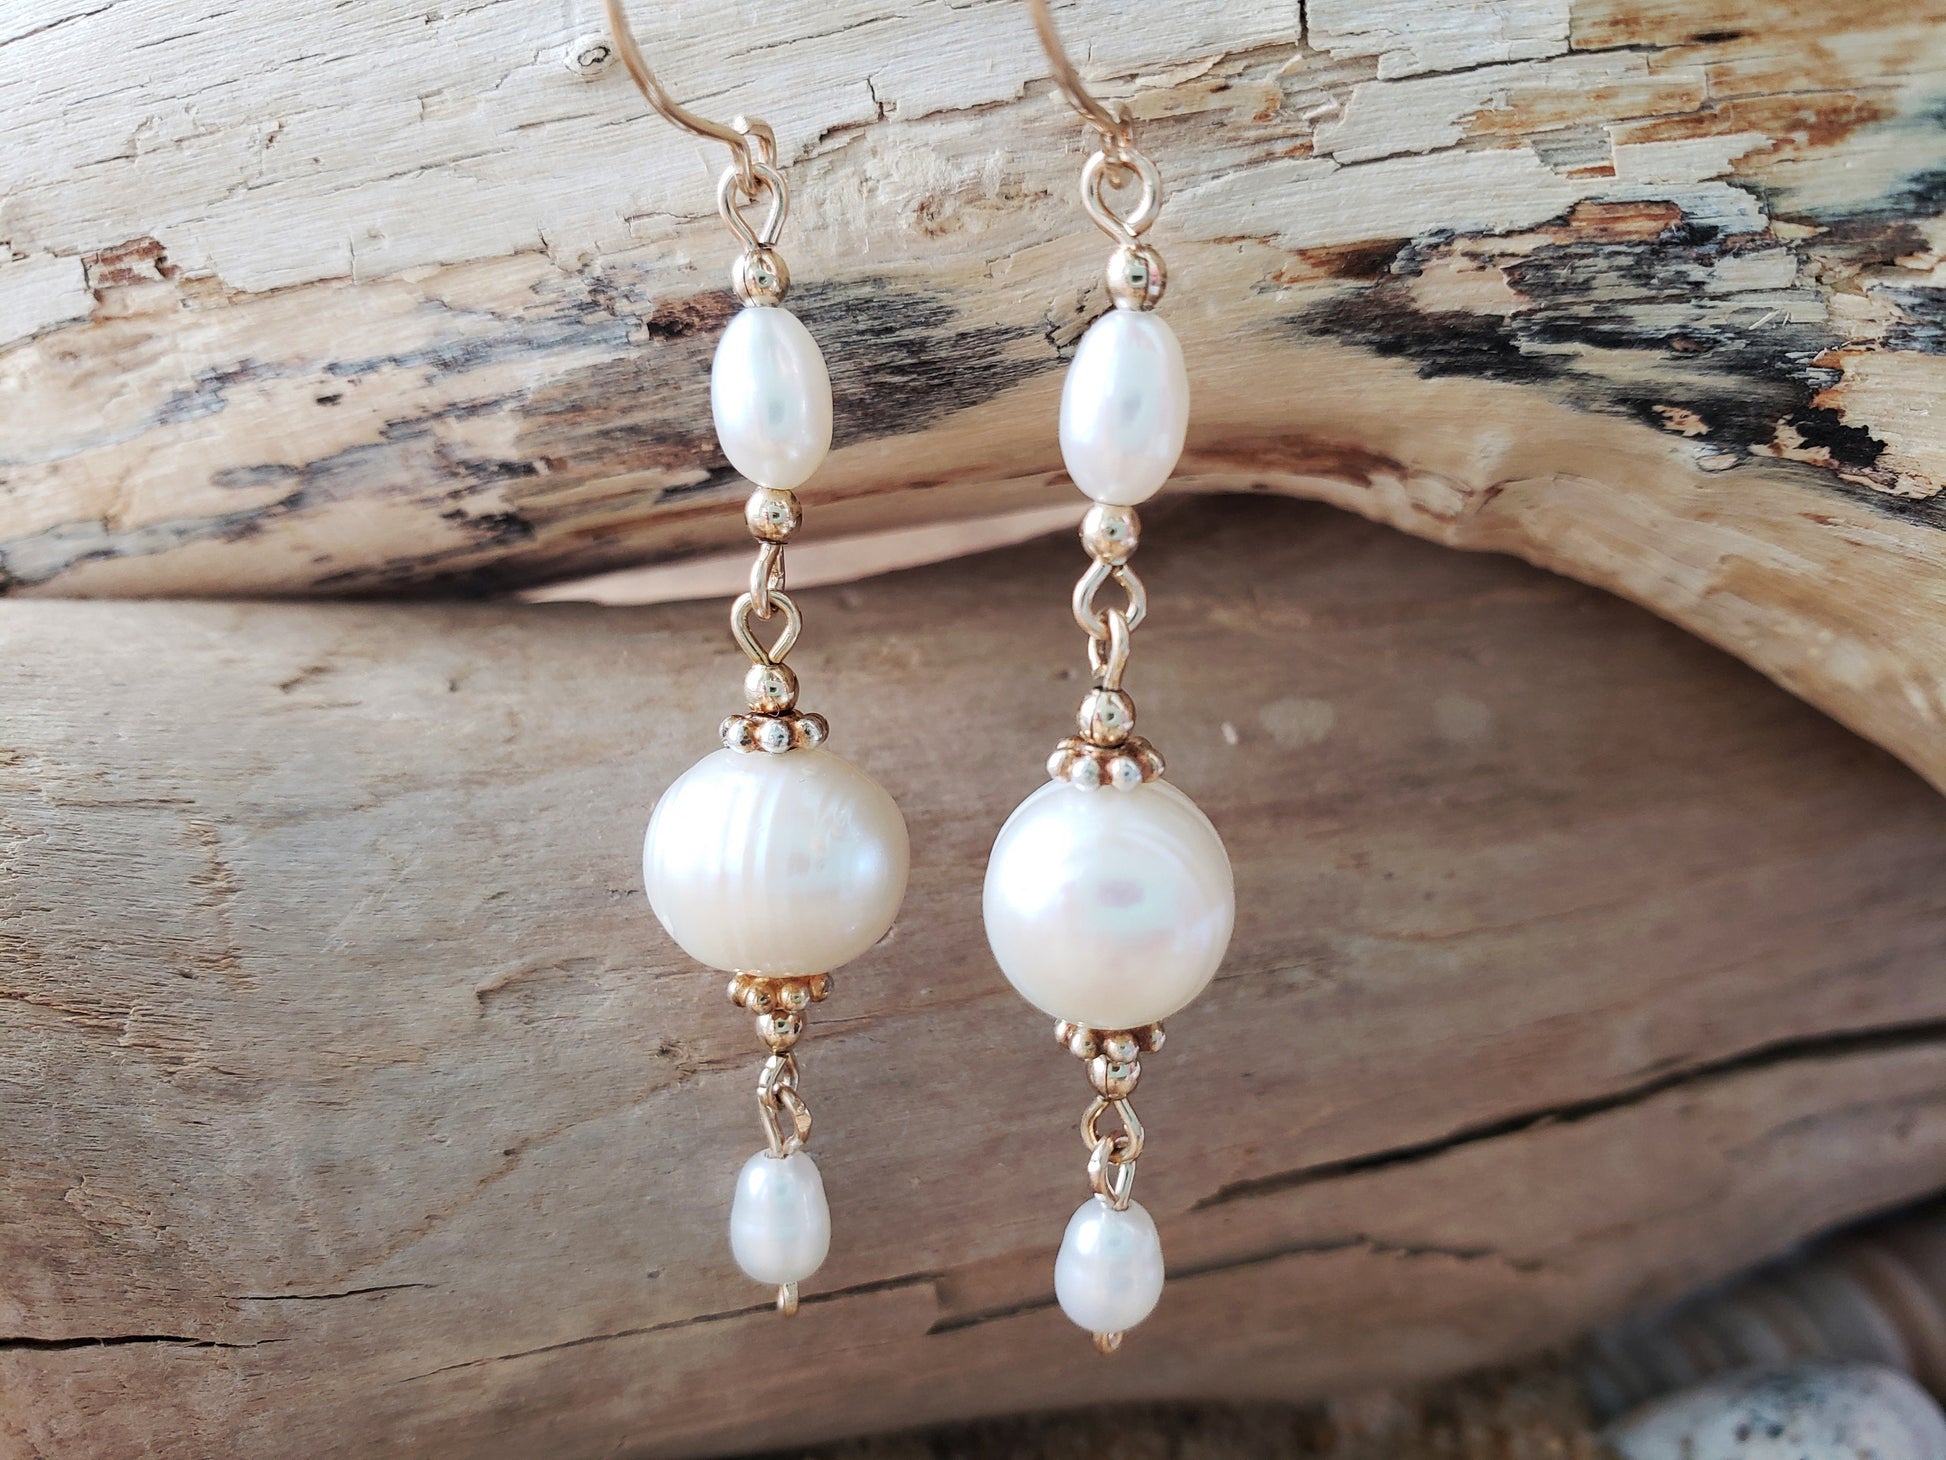 Long Harmony Pearl Earrings, Long Pearl Earrings made with 14k Gold Filled and white Freshwater Cultured Pearls